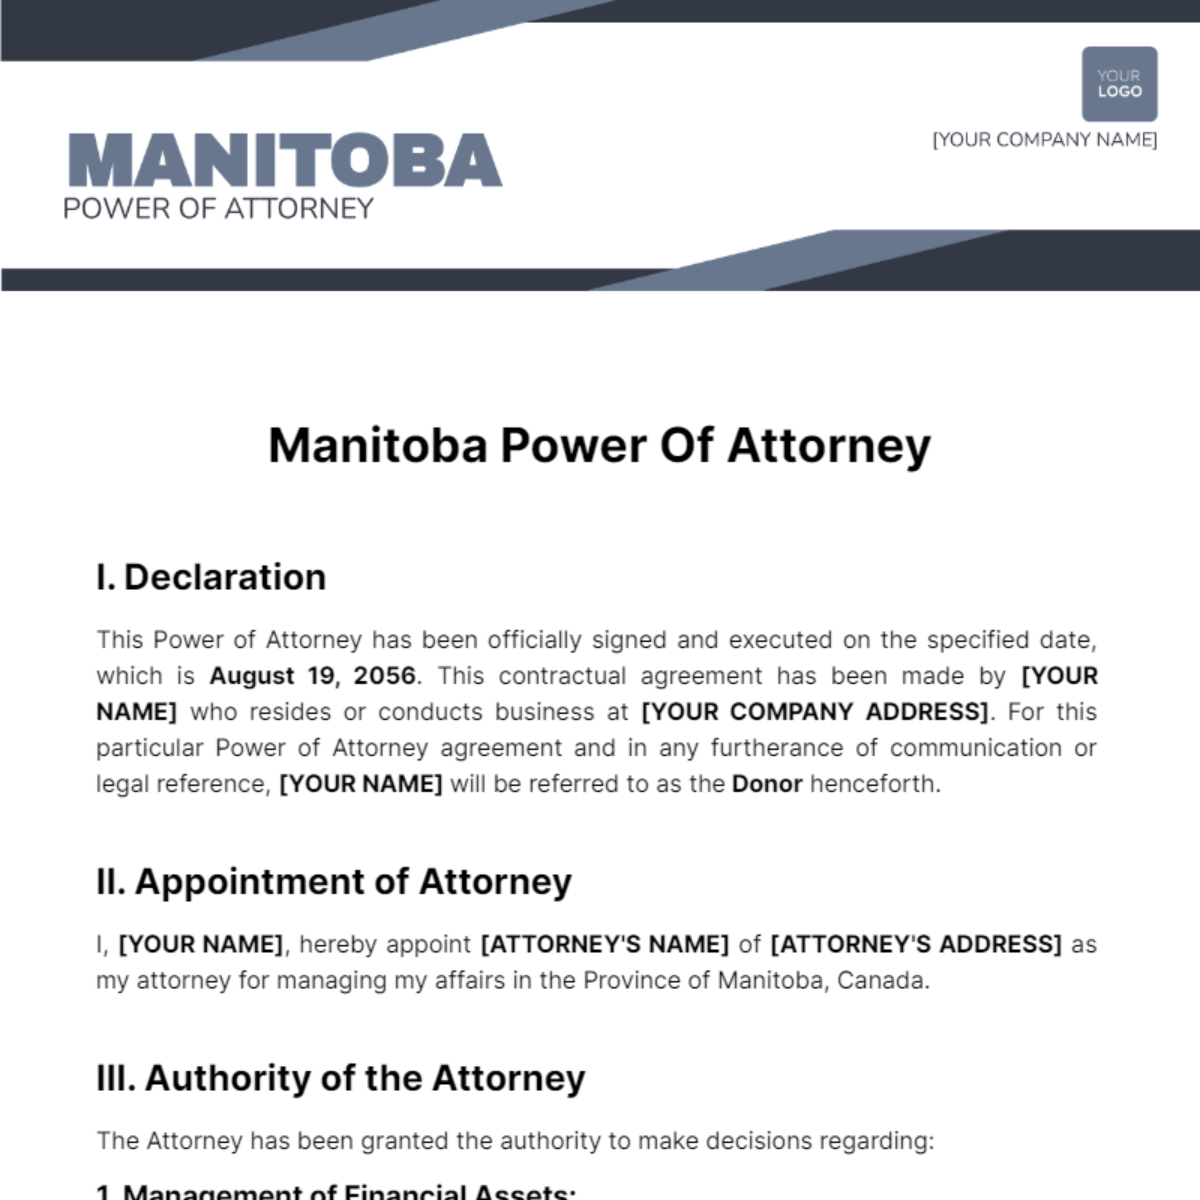 Manitoba Power of Attorney Template